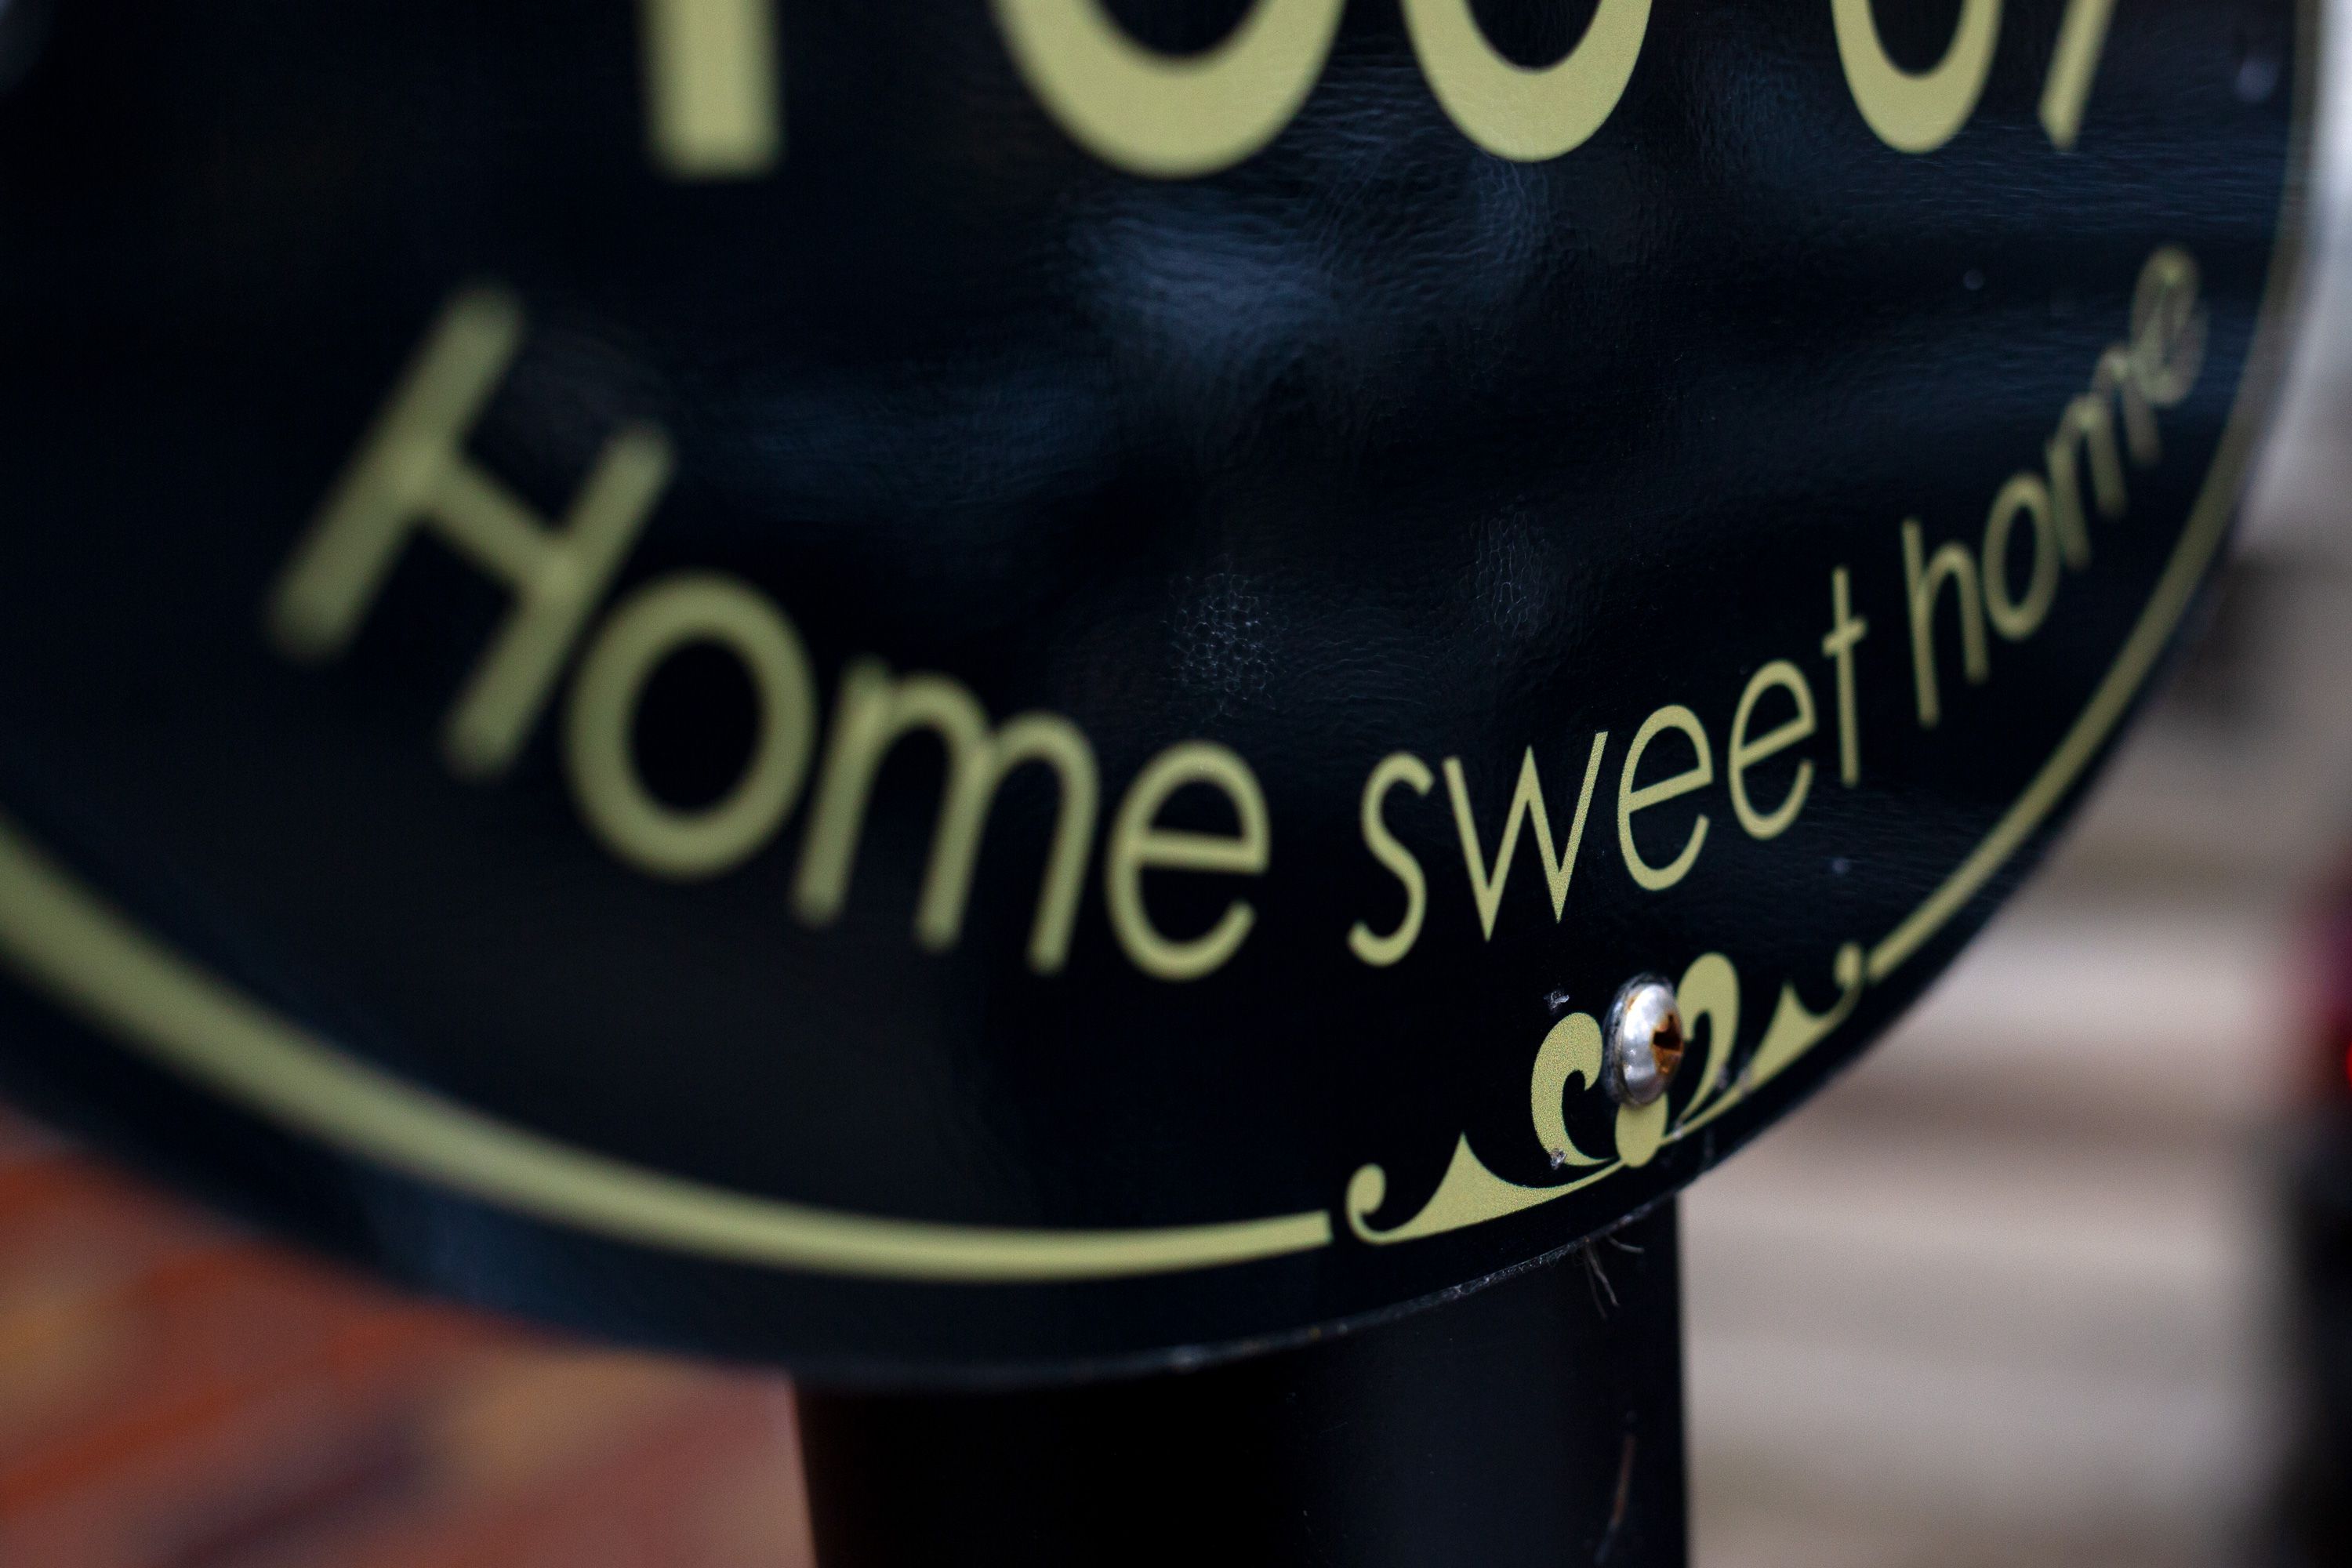 A sign reads “Home sweet home” at the Jamaica, Queens, address where Dawn Peterson was fatally shot.